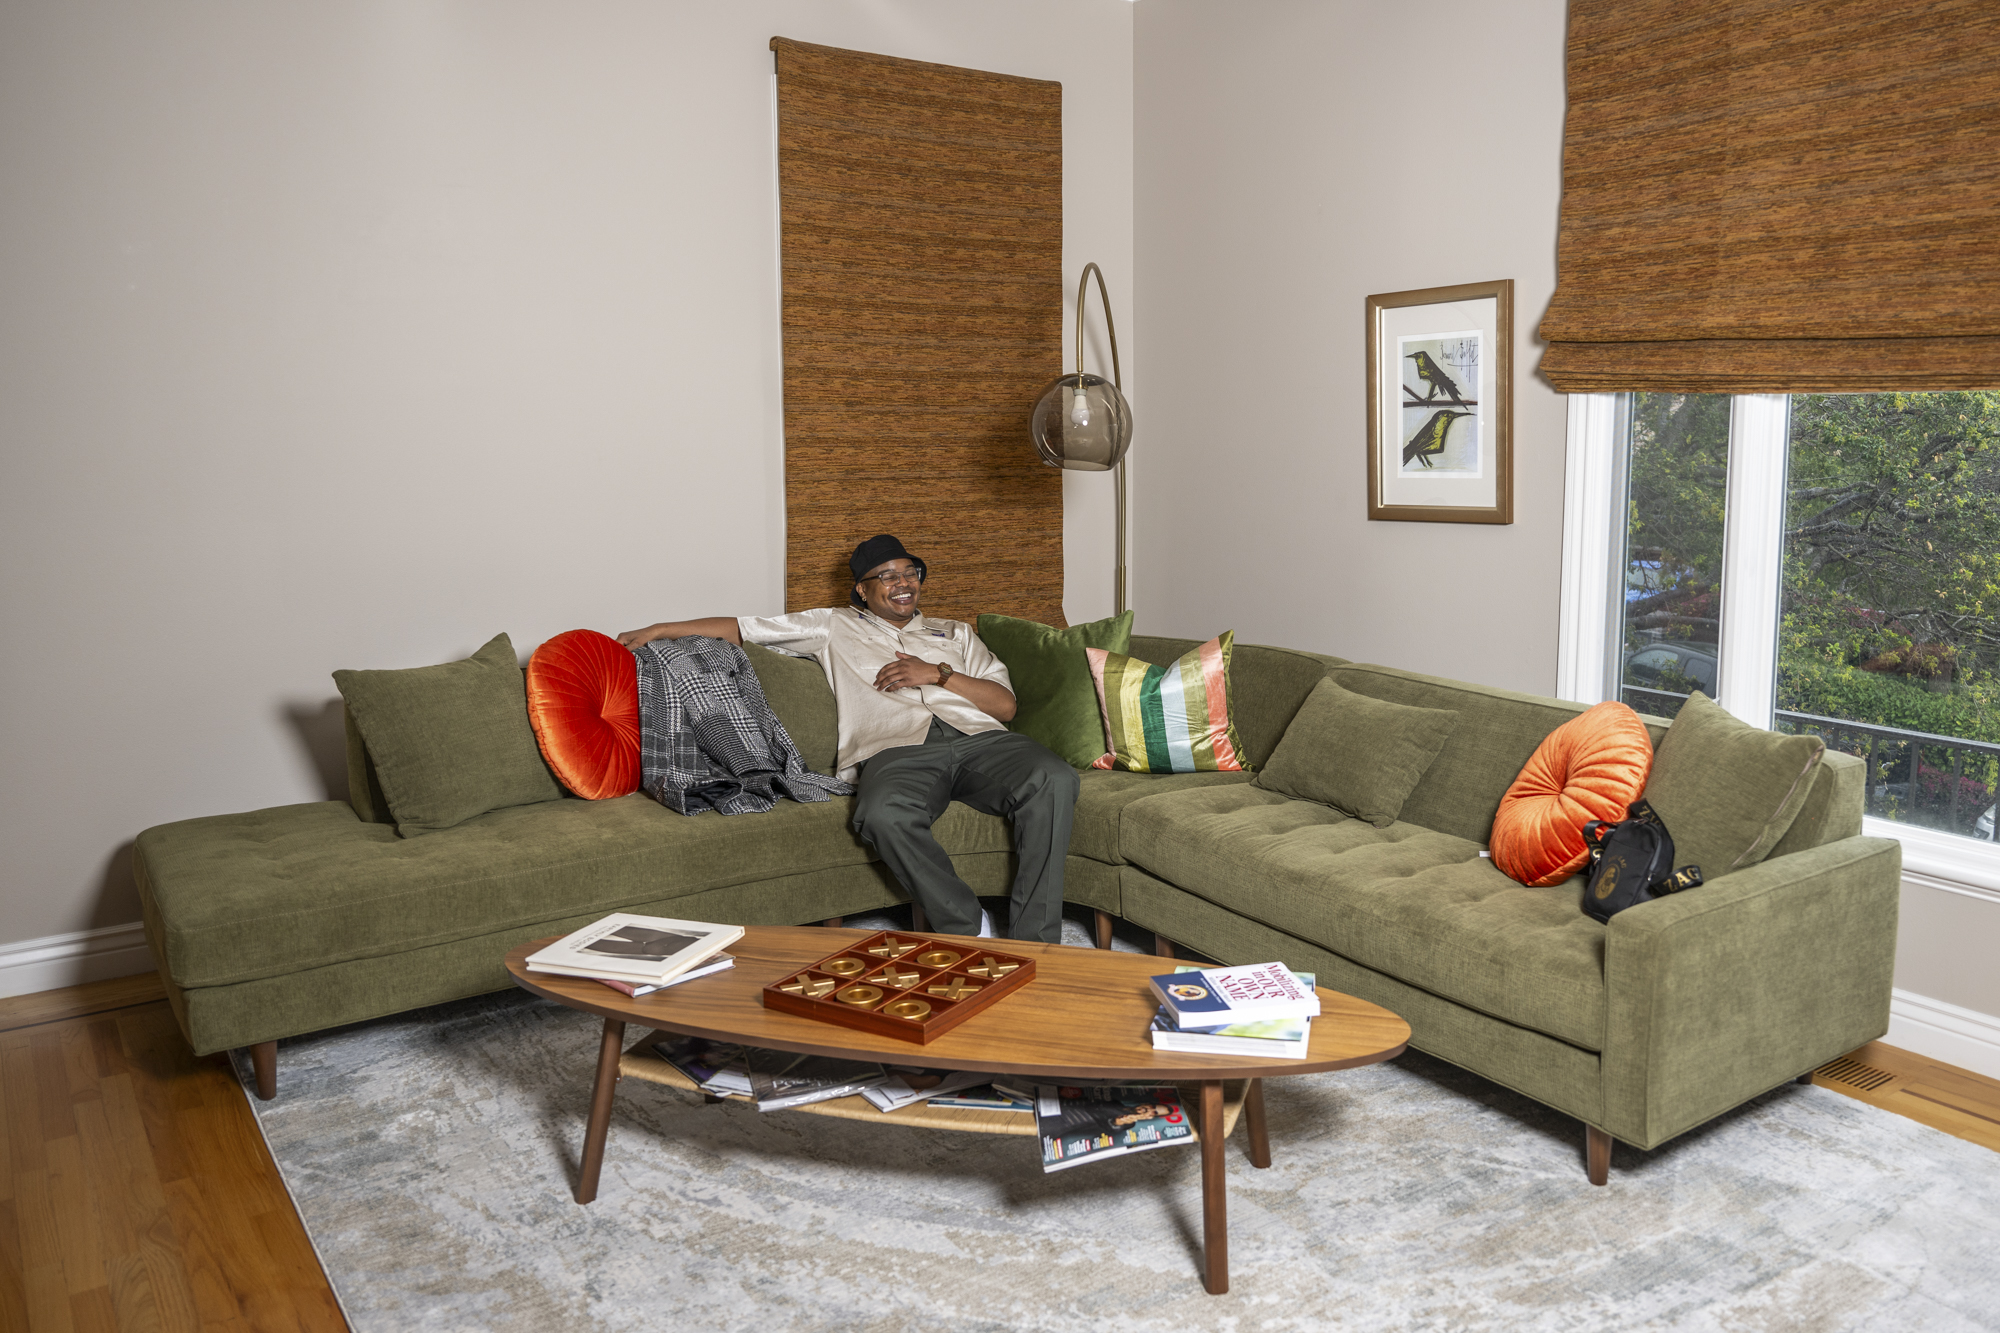 Person sits relaxed in corner of long green couch in living room